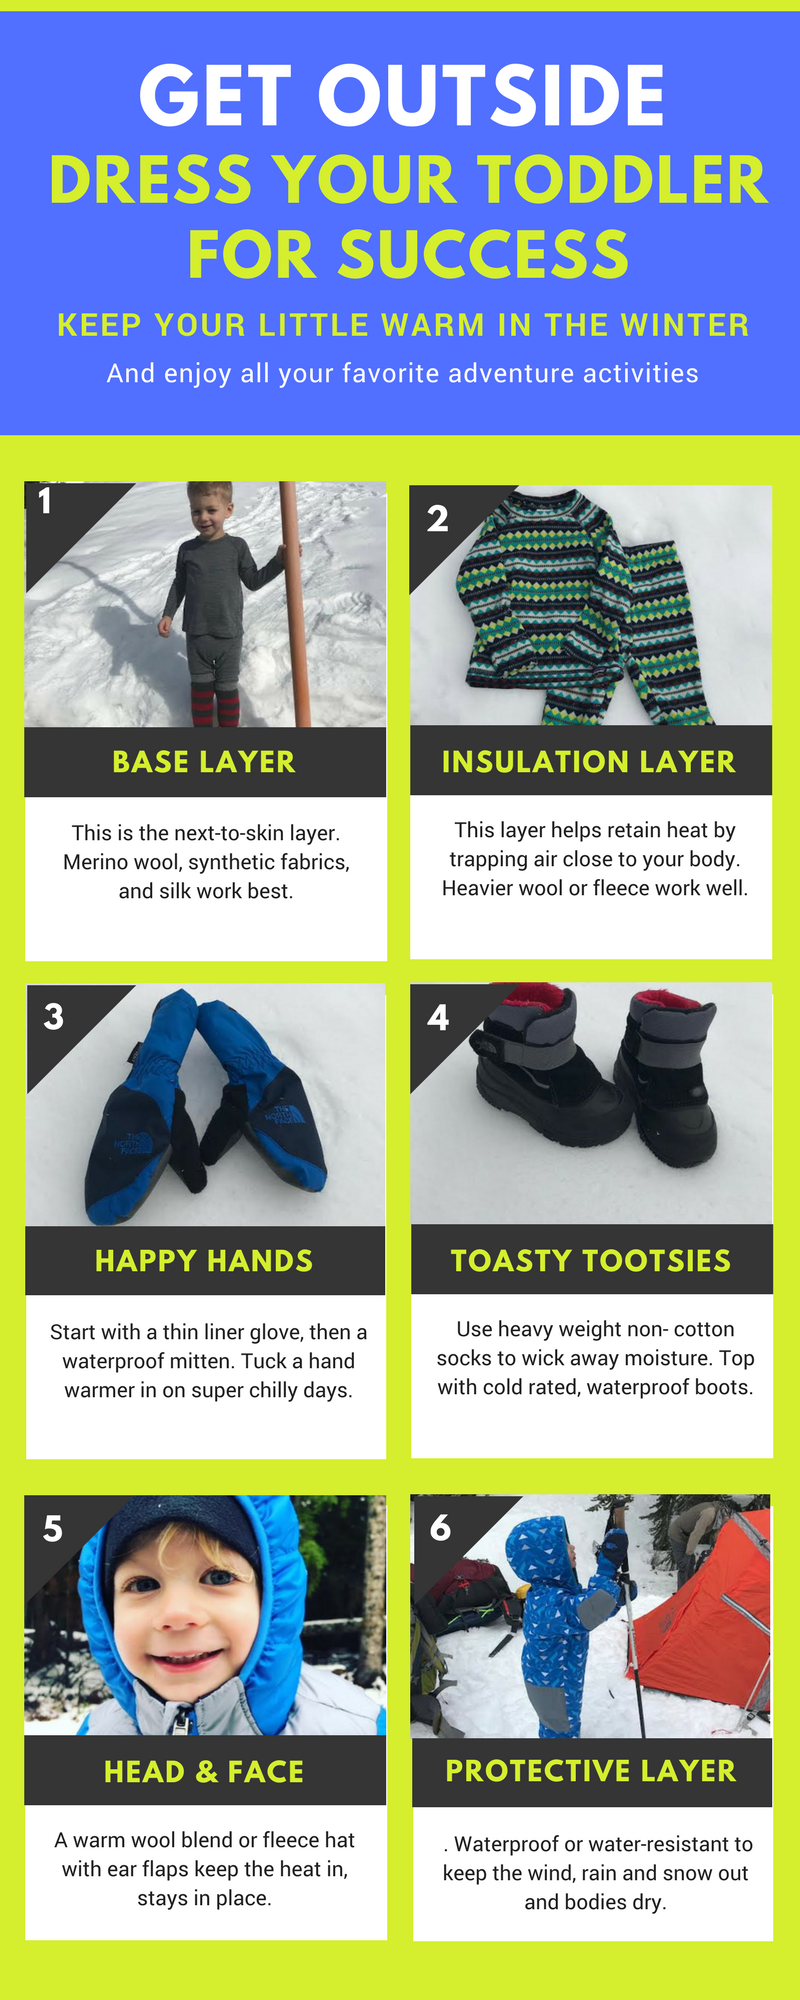 How to dress your toddler for winter fun